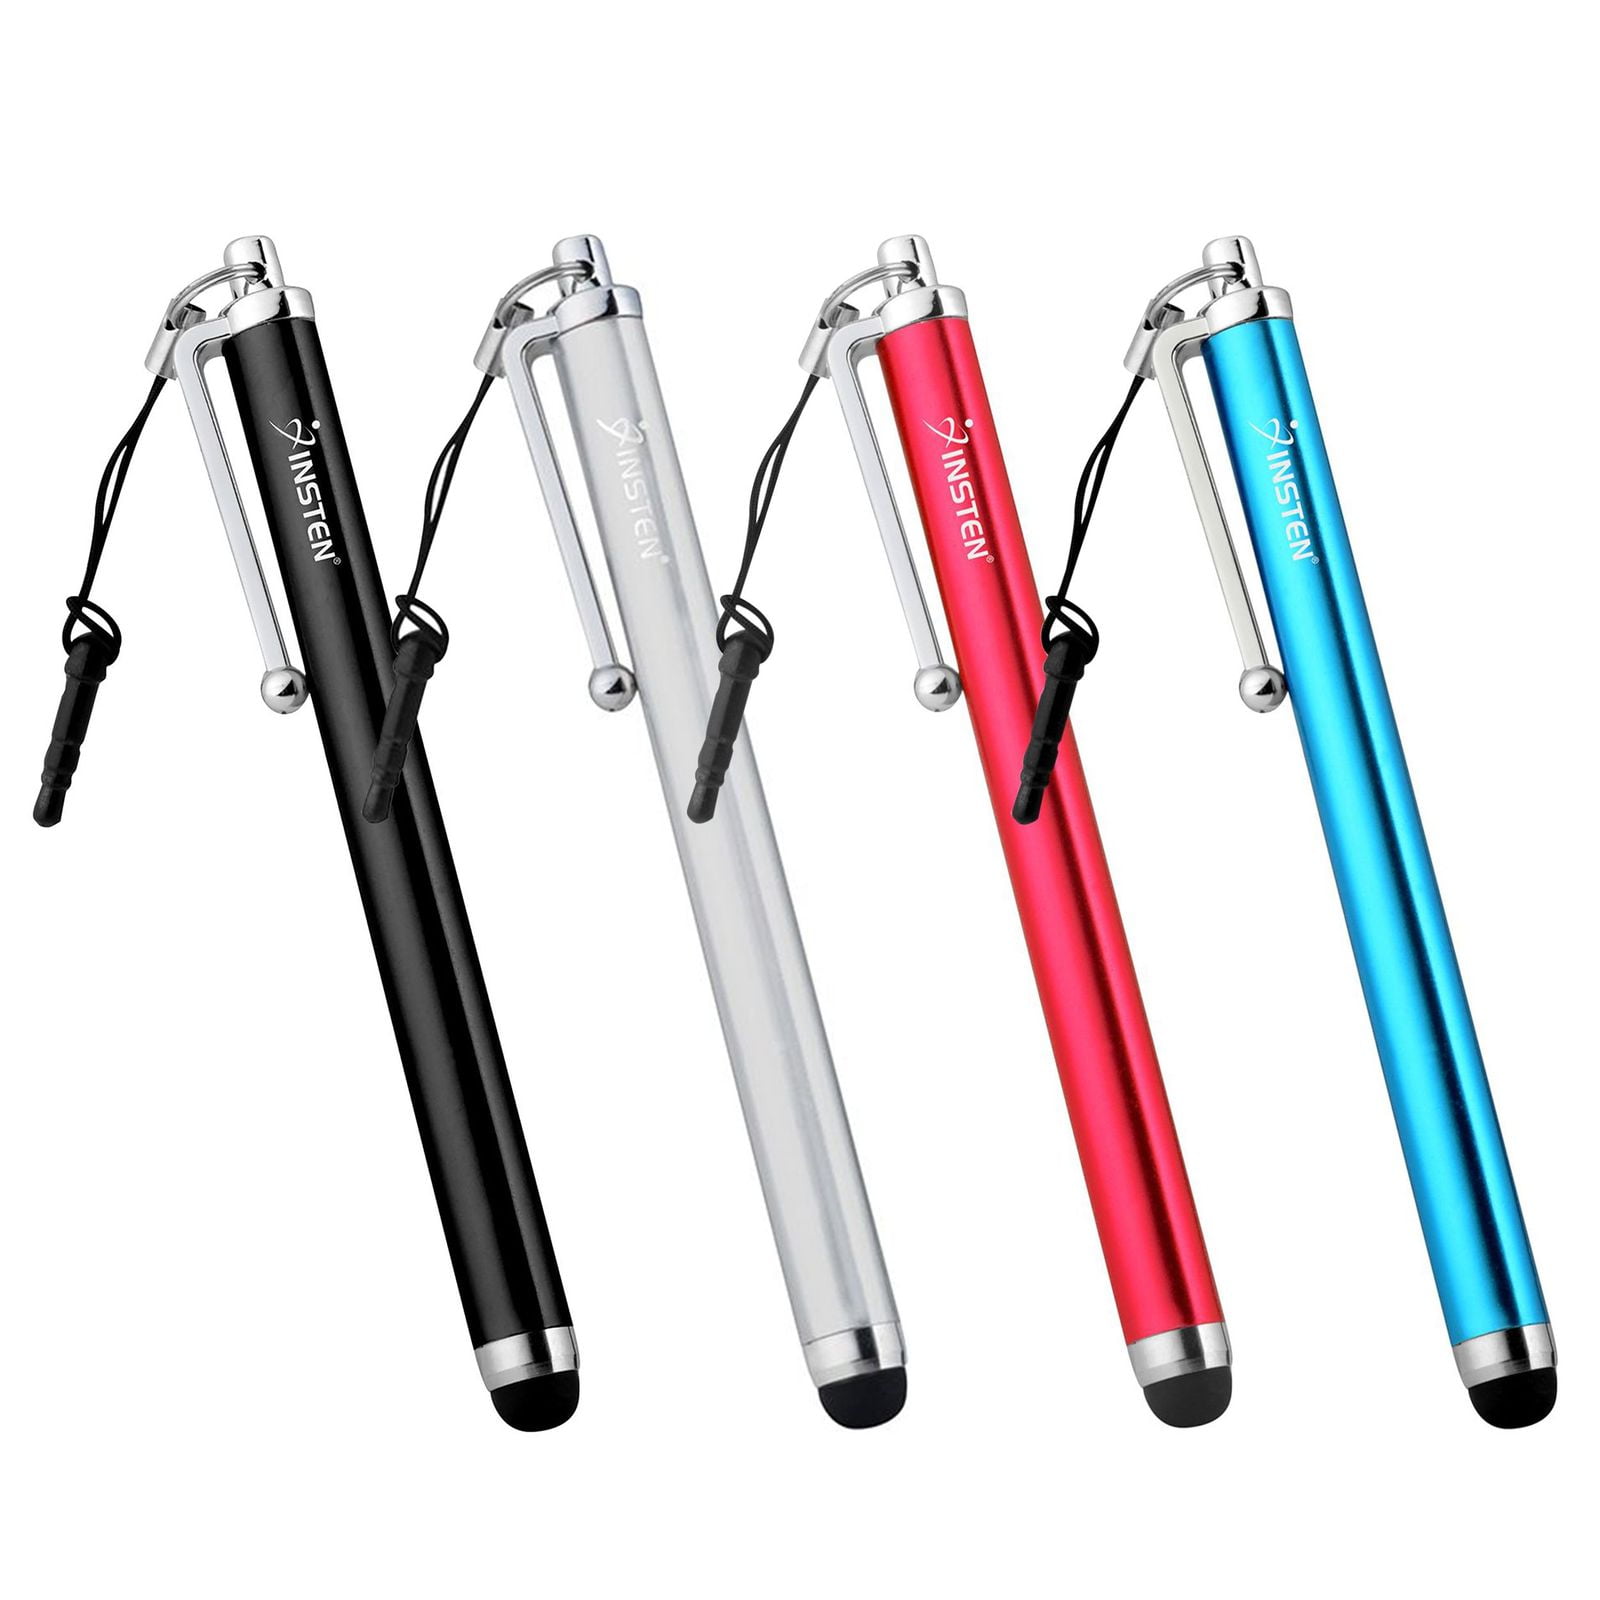 10X Stylus Screen Touch Pen For iPhone IPad Tablet PC Samsung HTC LG MI 